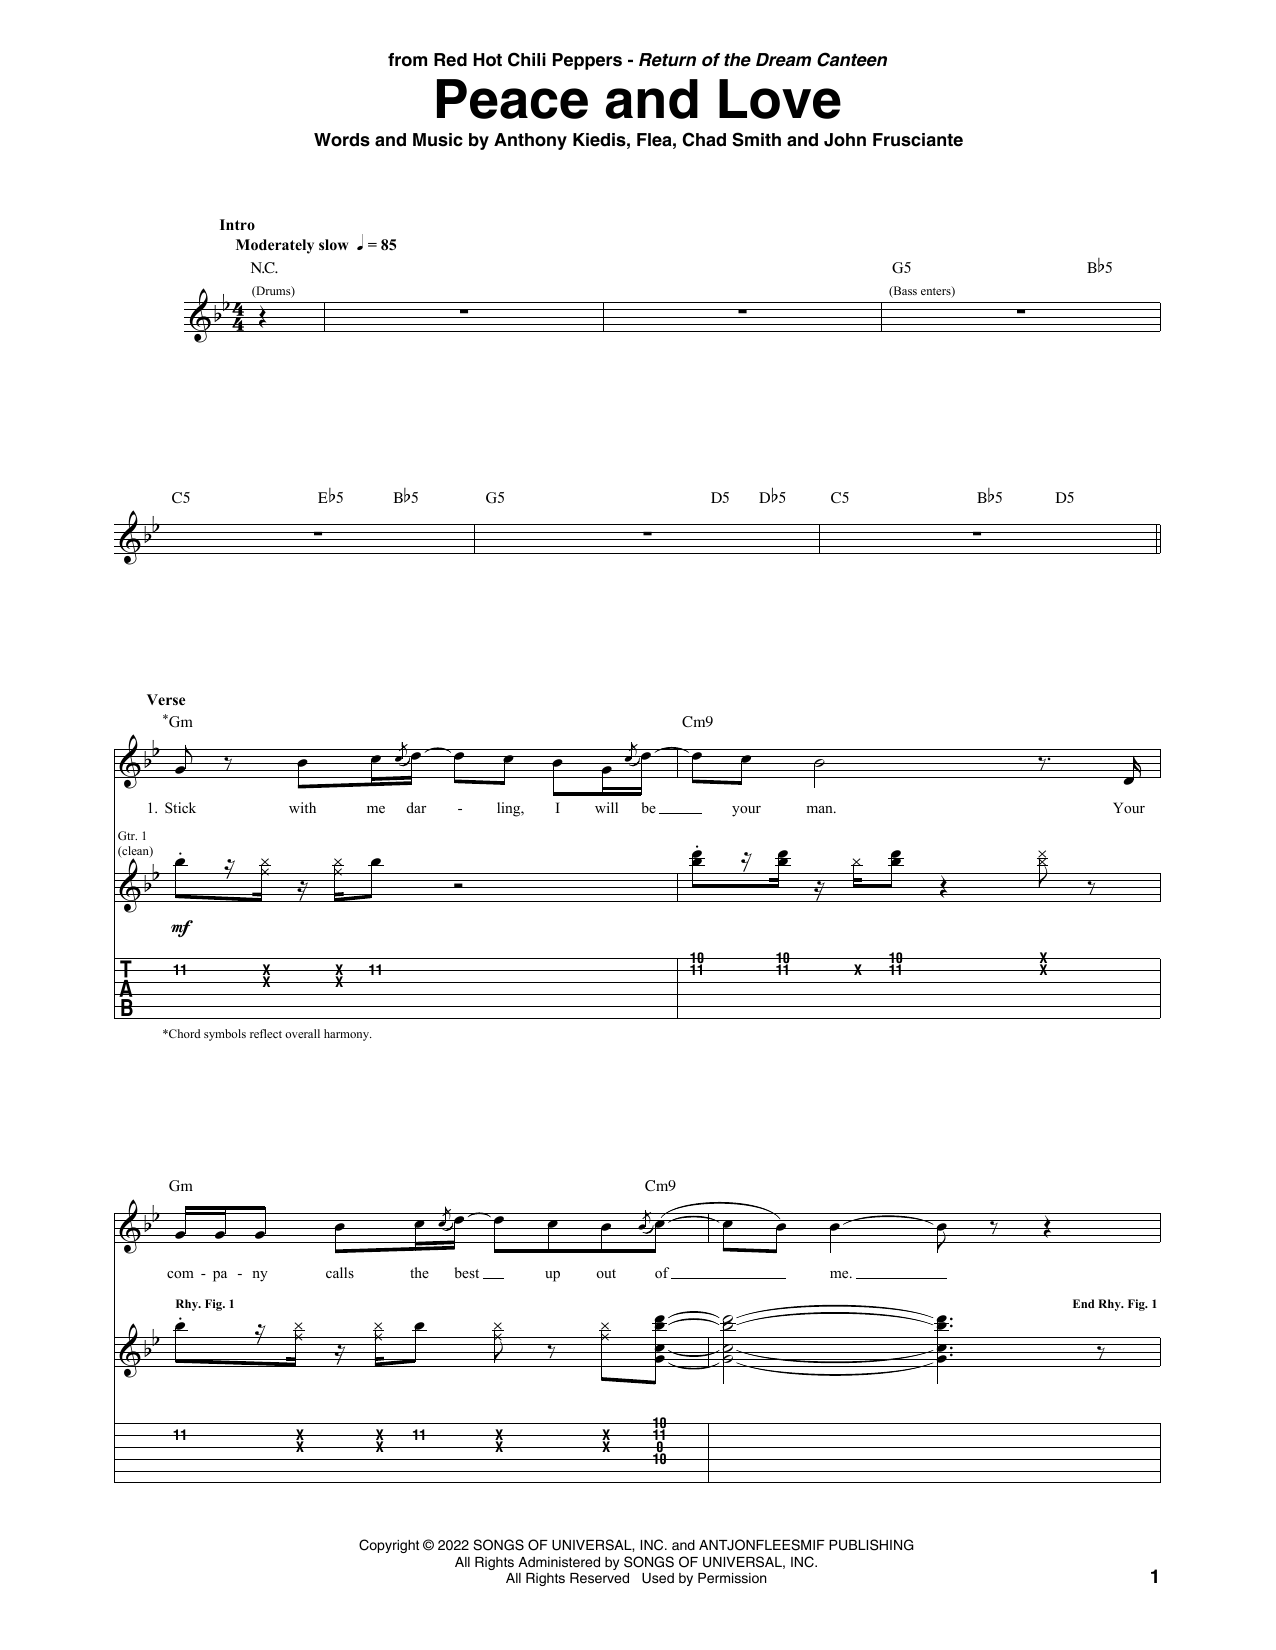 Download Red Hot Chili Peppers Peace And Love Sheet Music